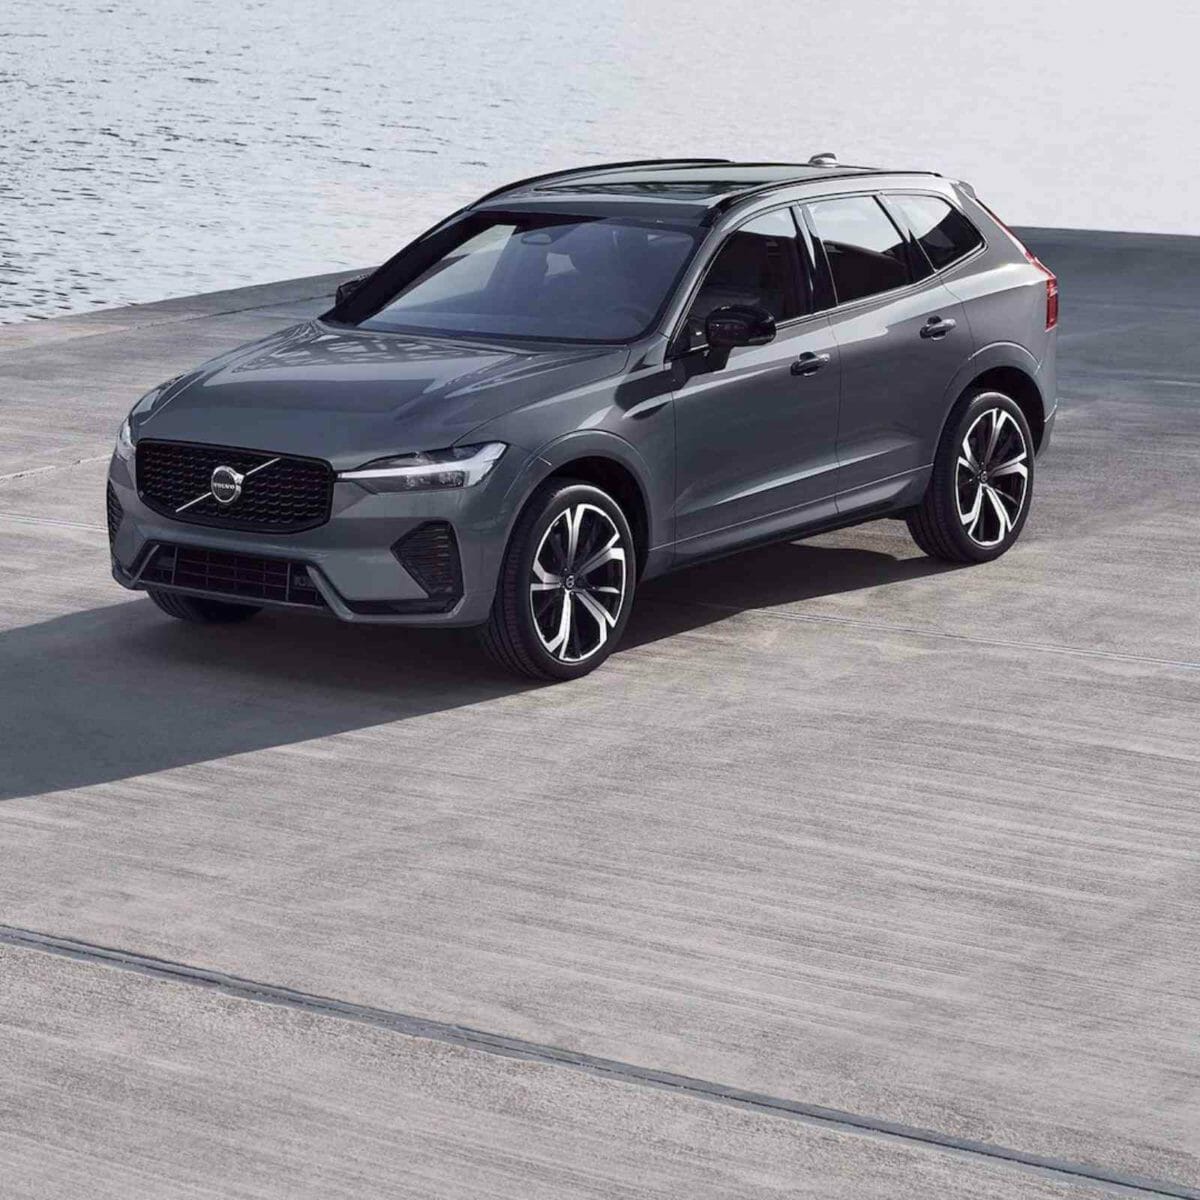 Volvo xc60 facelift launched